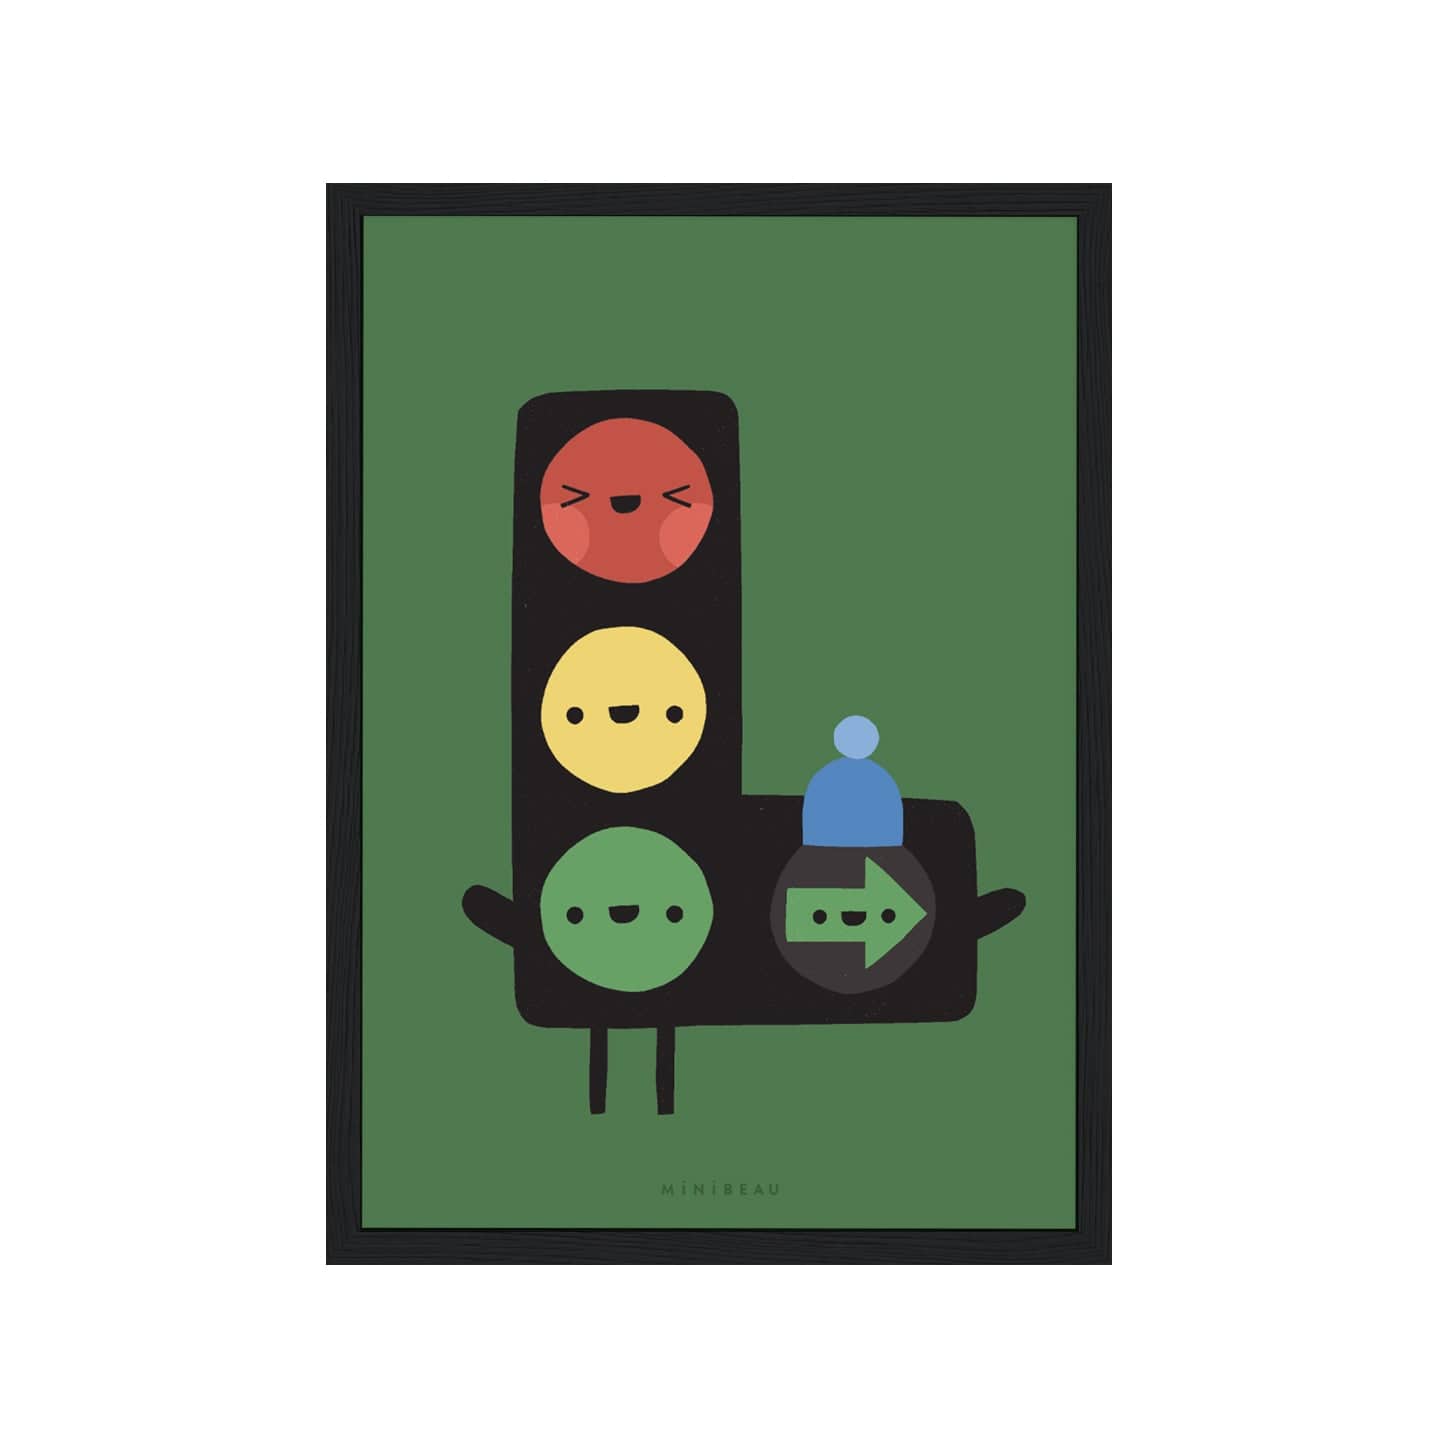 Art print in a black frame. Our Happy Alphabet 'L' Art Print shows filter traffic lights in the shape of an L with a smiling face in each light. The Green Arrow light is wearing a blue woolly hat. All on a dark green background.